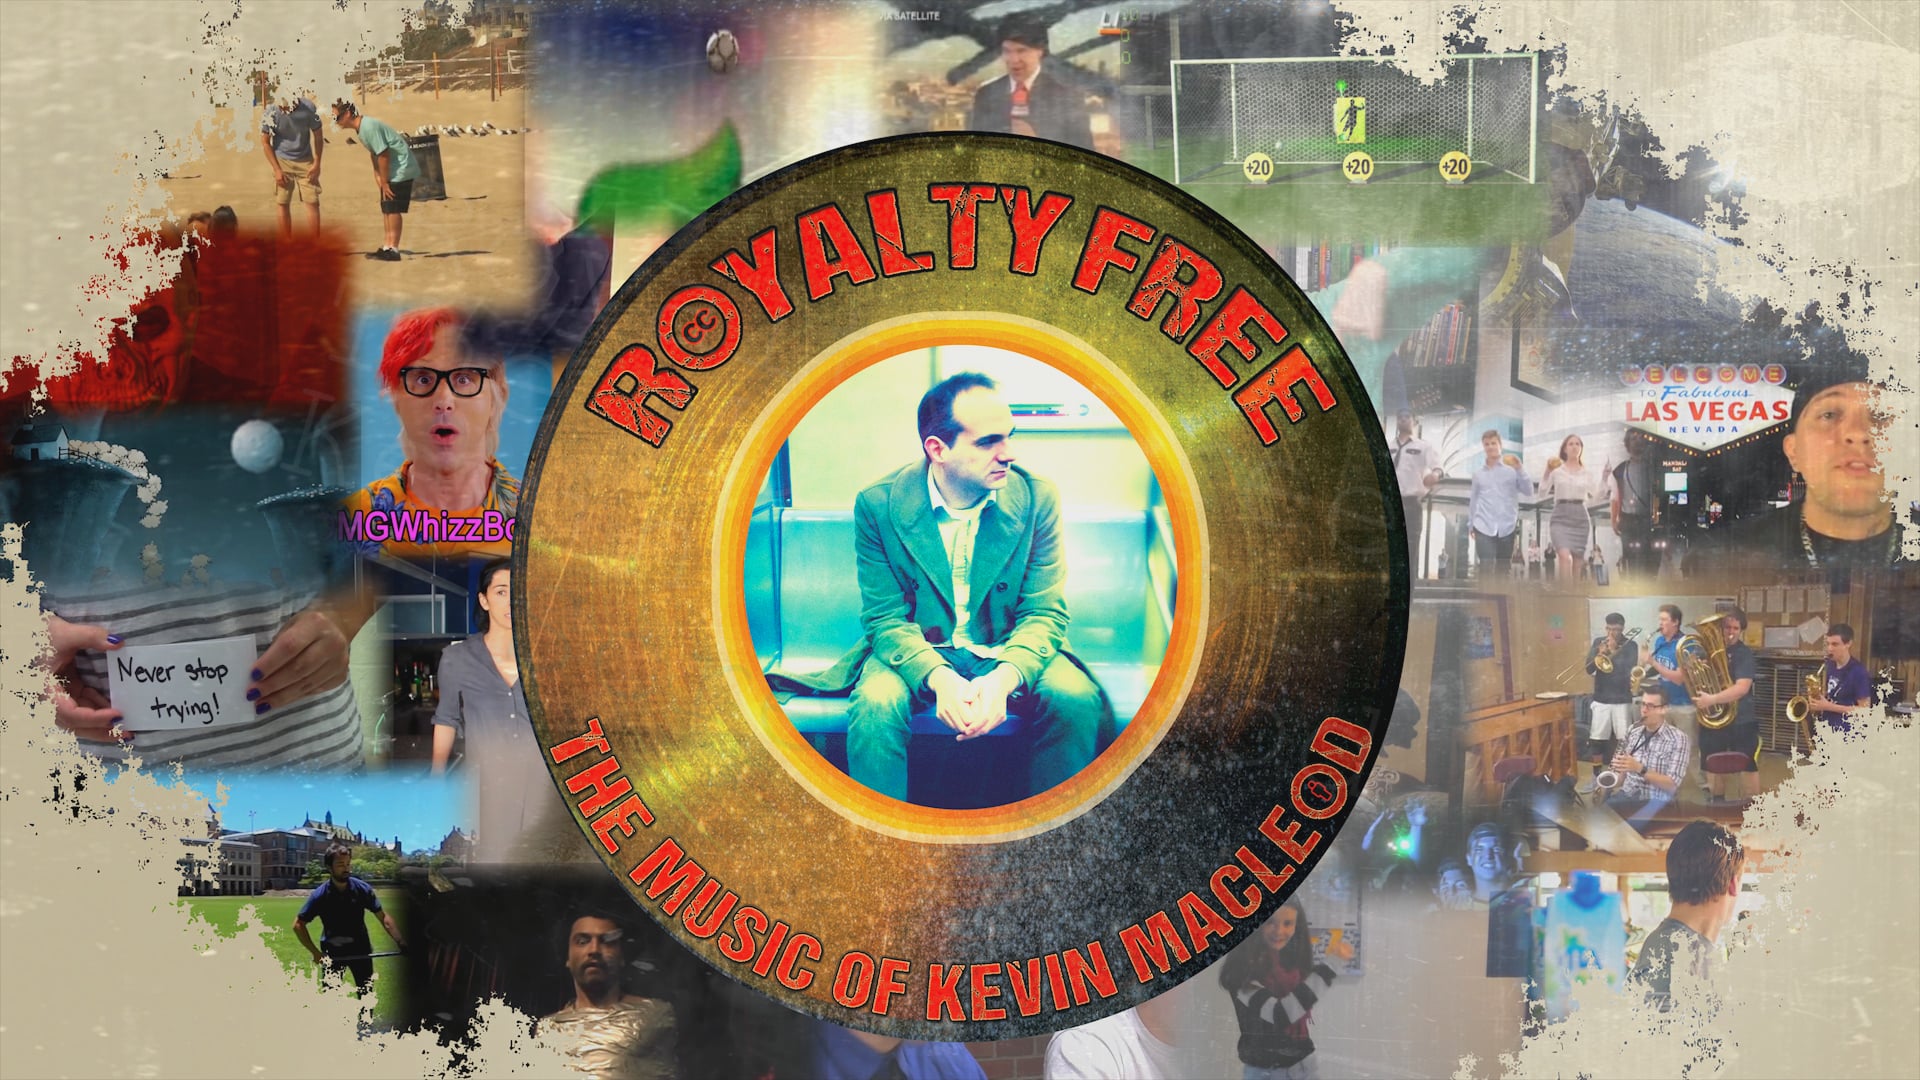 Watch Royalty Free The Music of Kevin MacLeod Online Vimeo On Demand on Vimeo